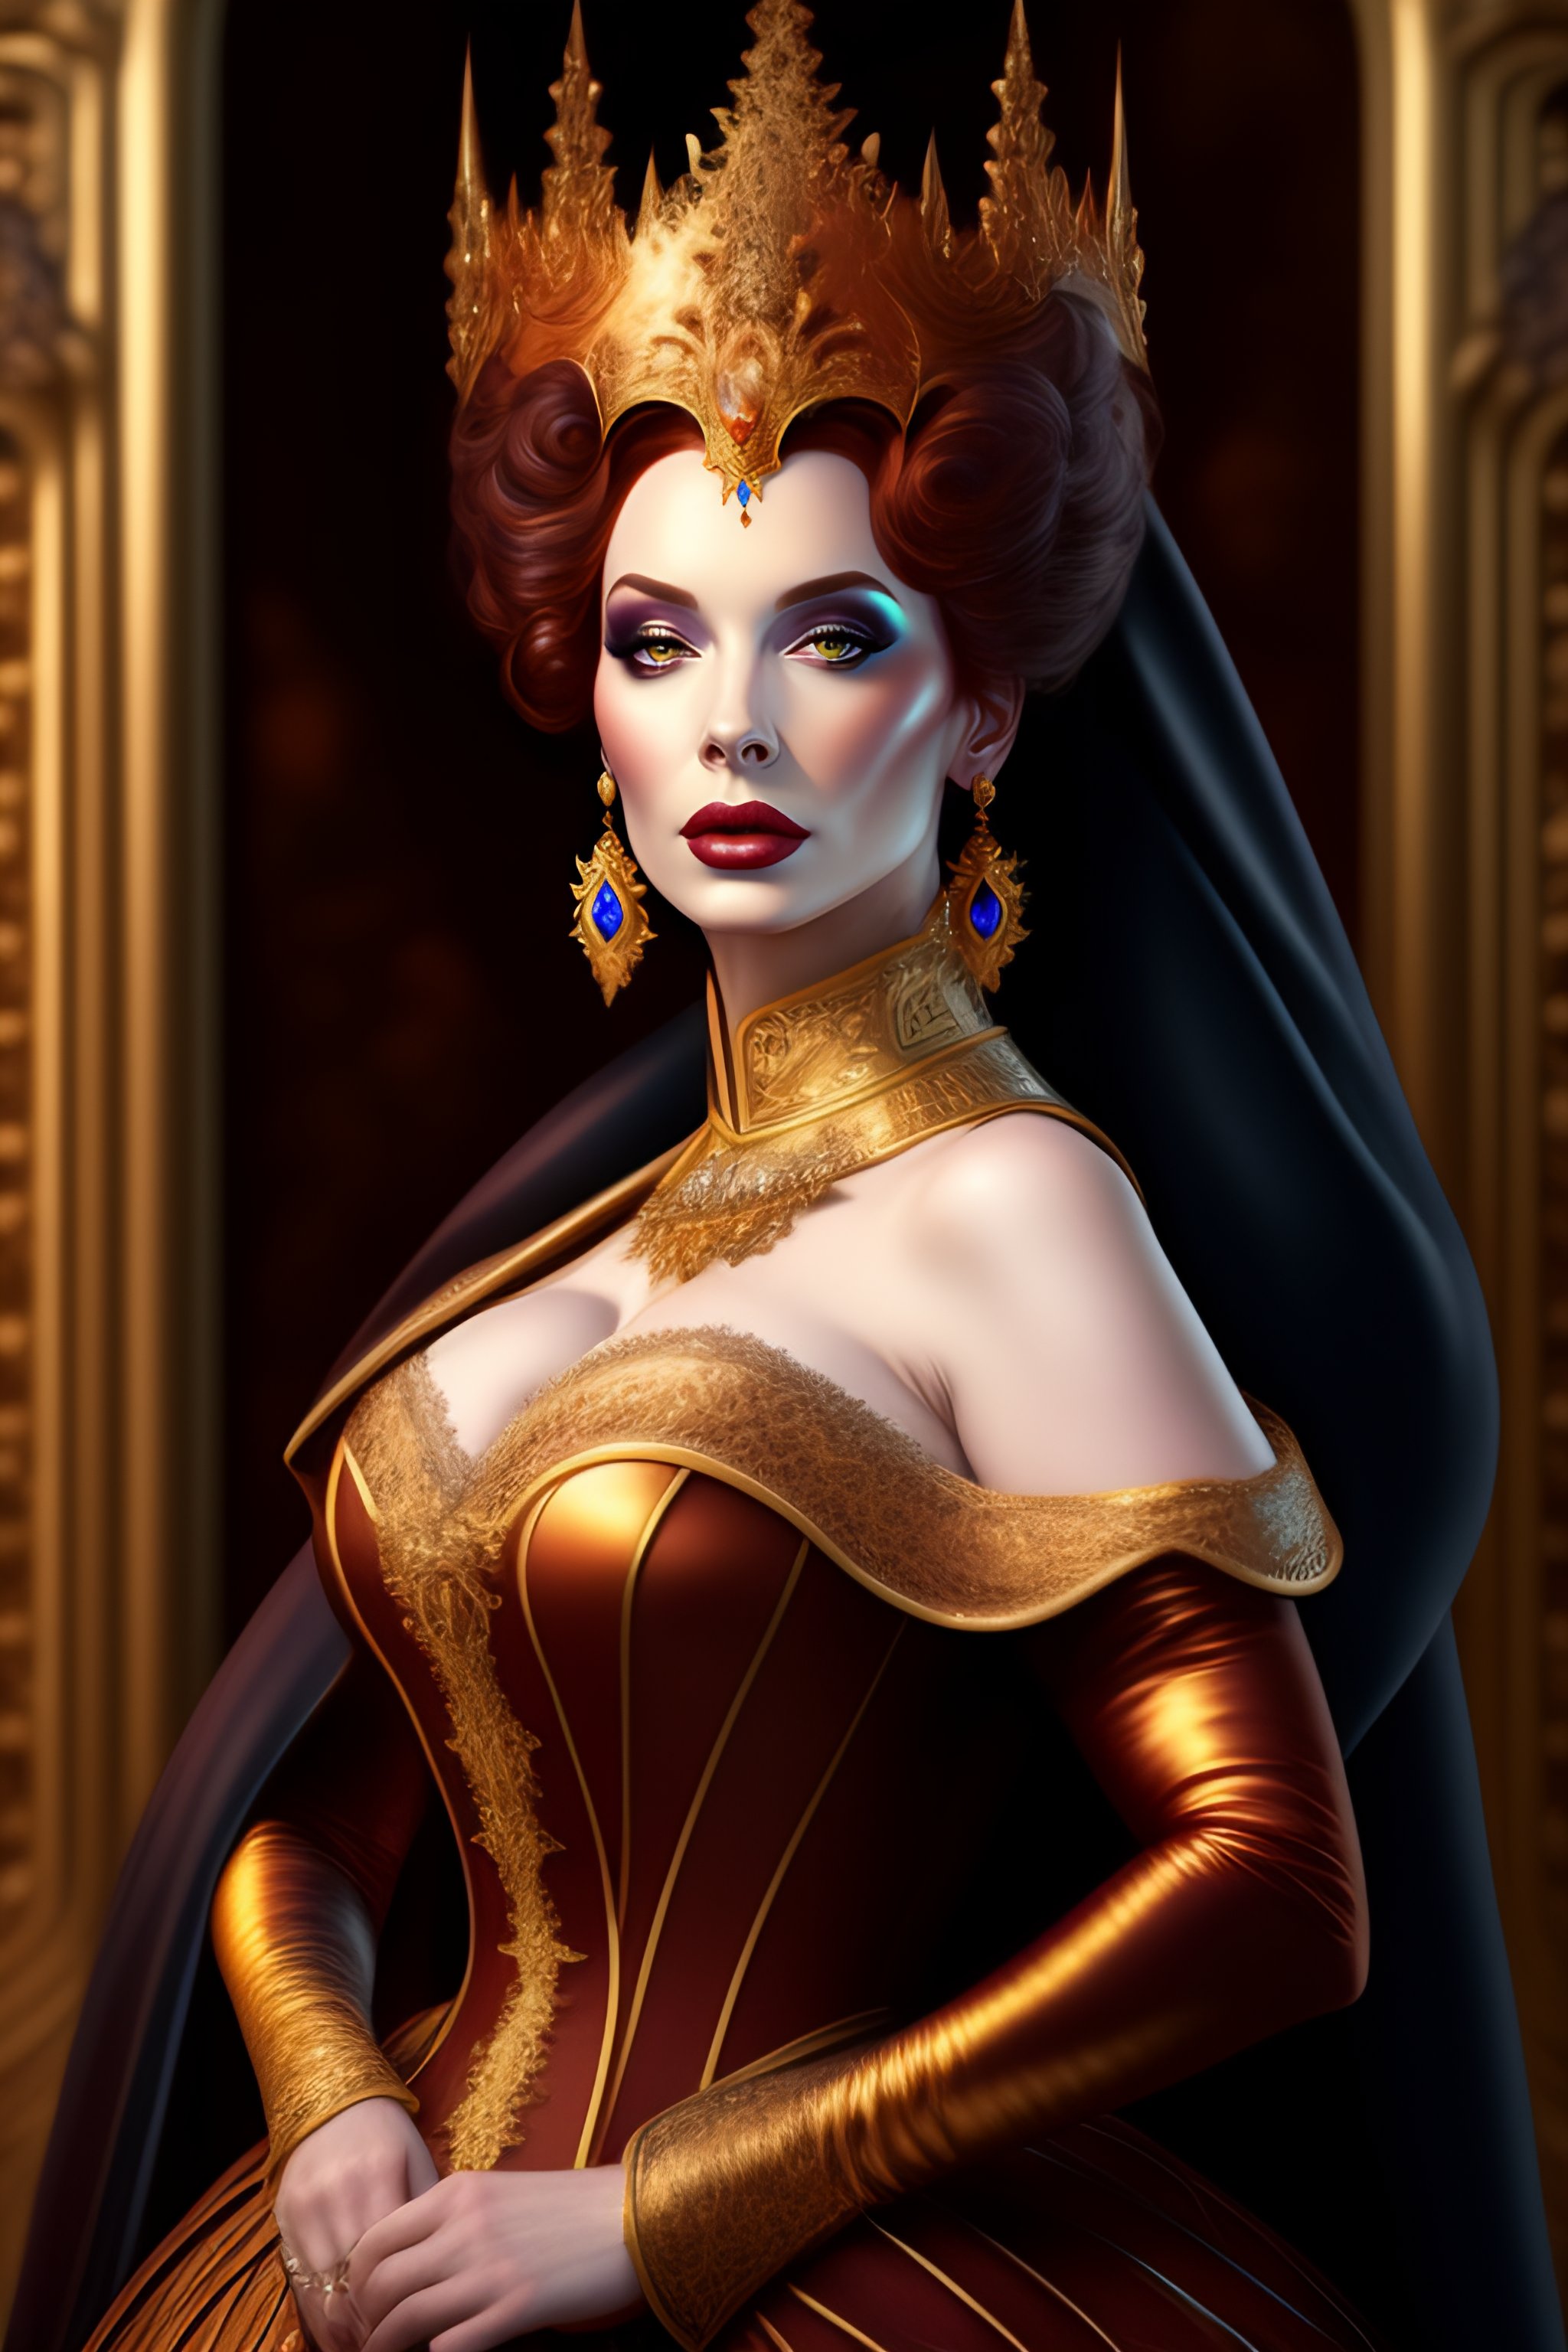 Lexica - Christina hendricks dressed digital a baroque painting, as elegant, highly dark queen, intricate, evil centered, painting, detailed